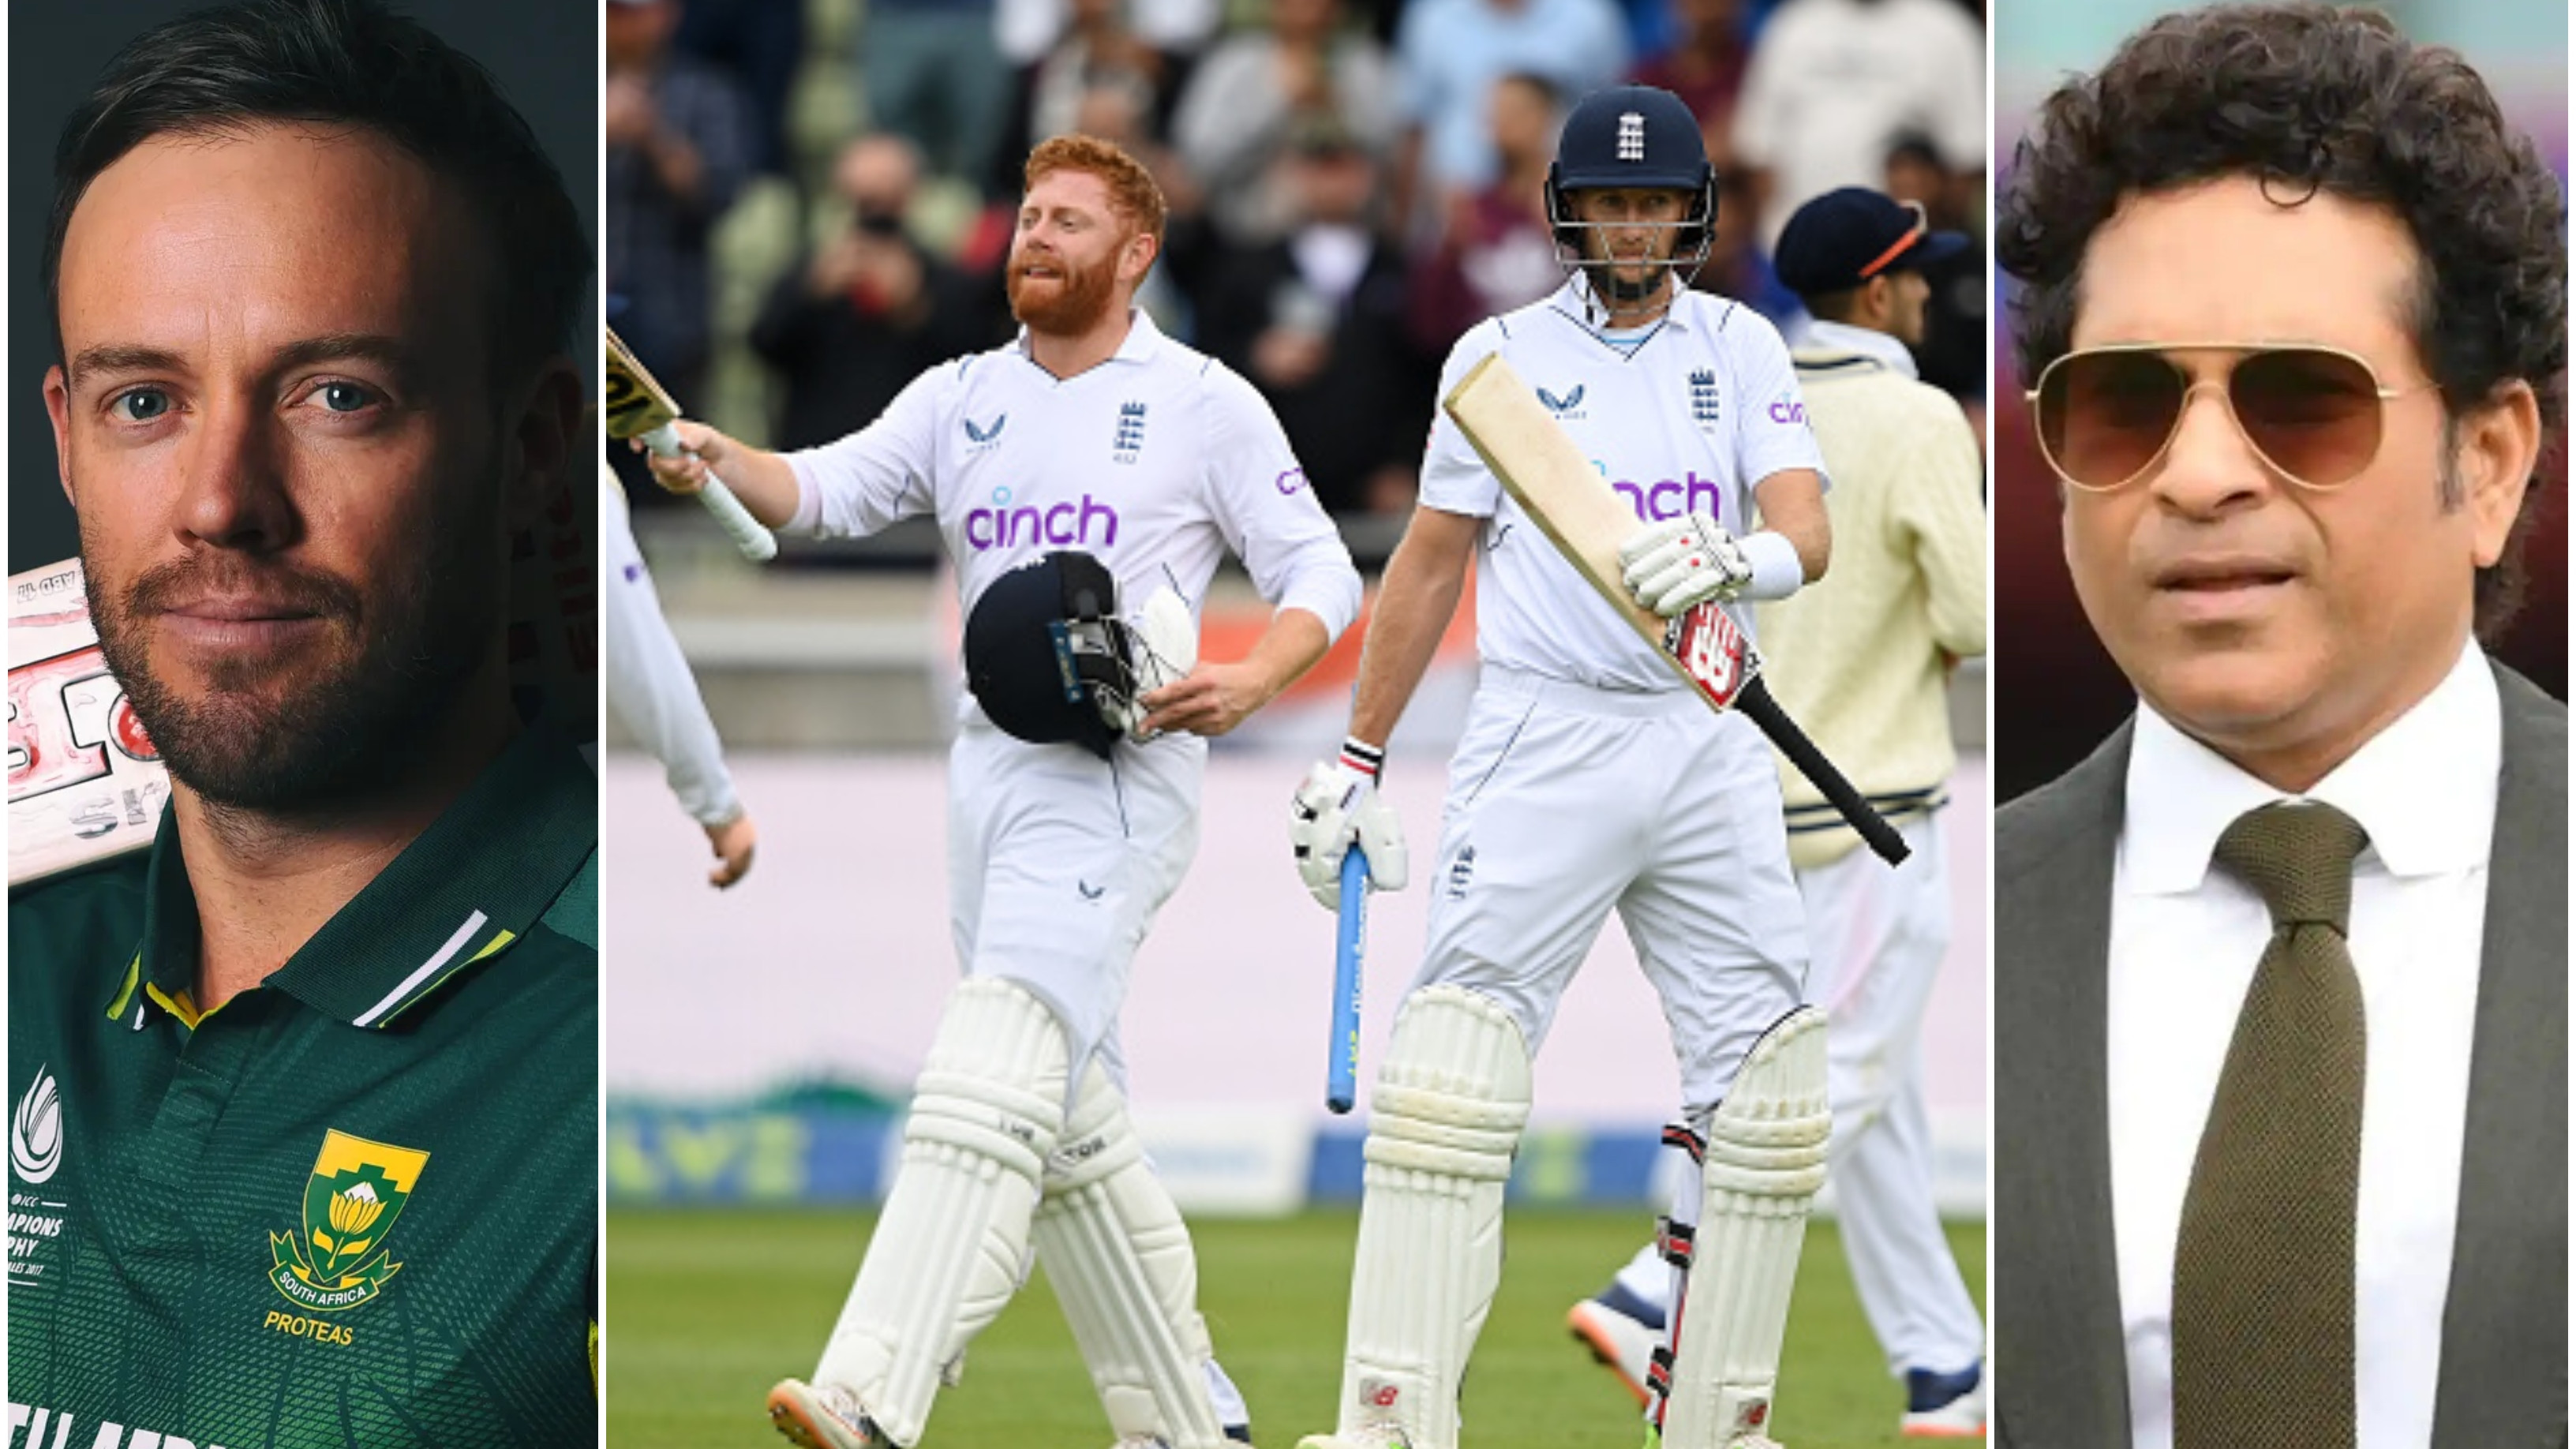 ENG v IND 2022: Cricket fraternity reacts as Root, Bairstow tons power England to series-levelling win at Edgbaston